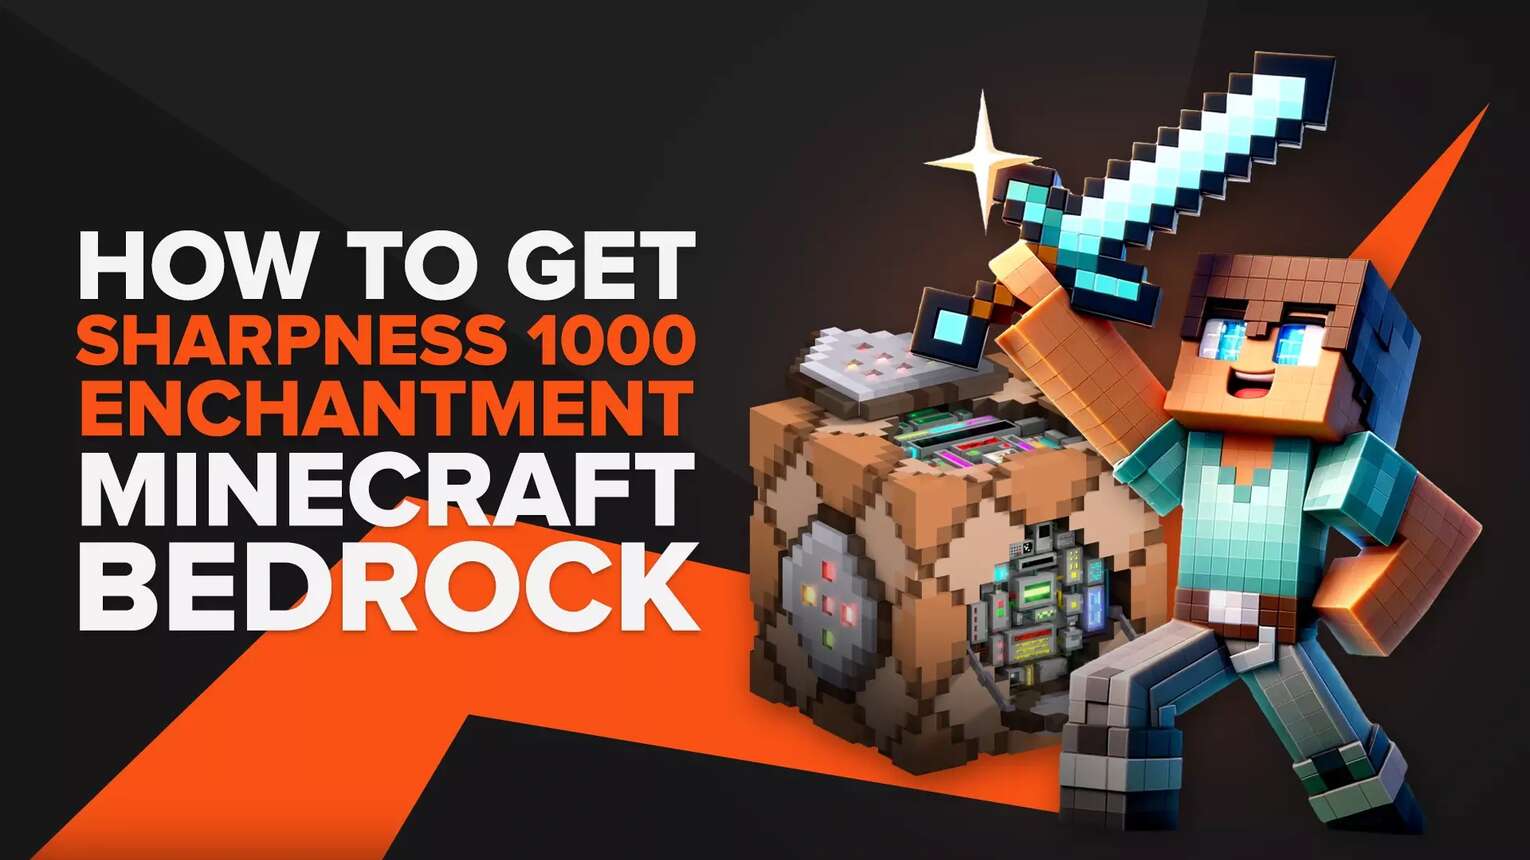 How to Get Sharpness 1000 Enchantment in Minecraft Bedrock